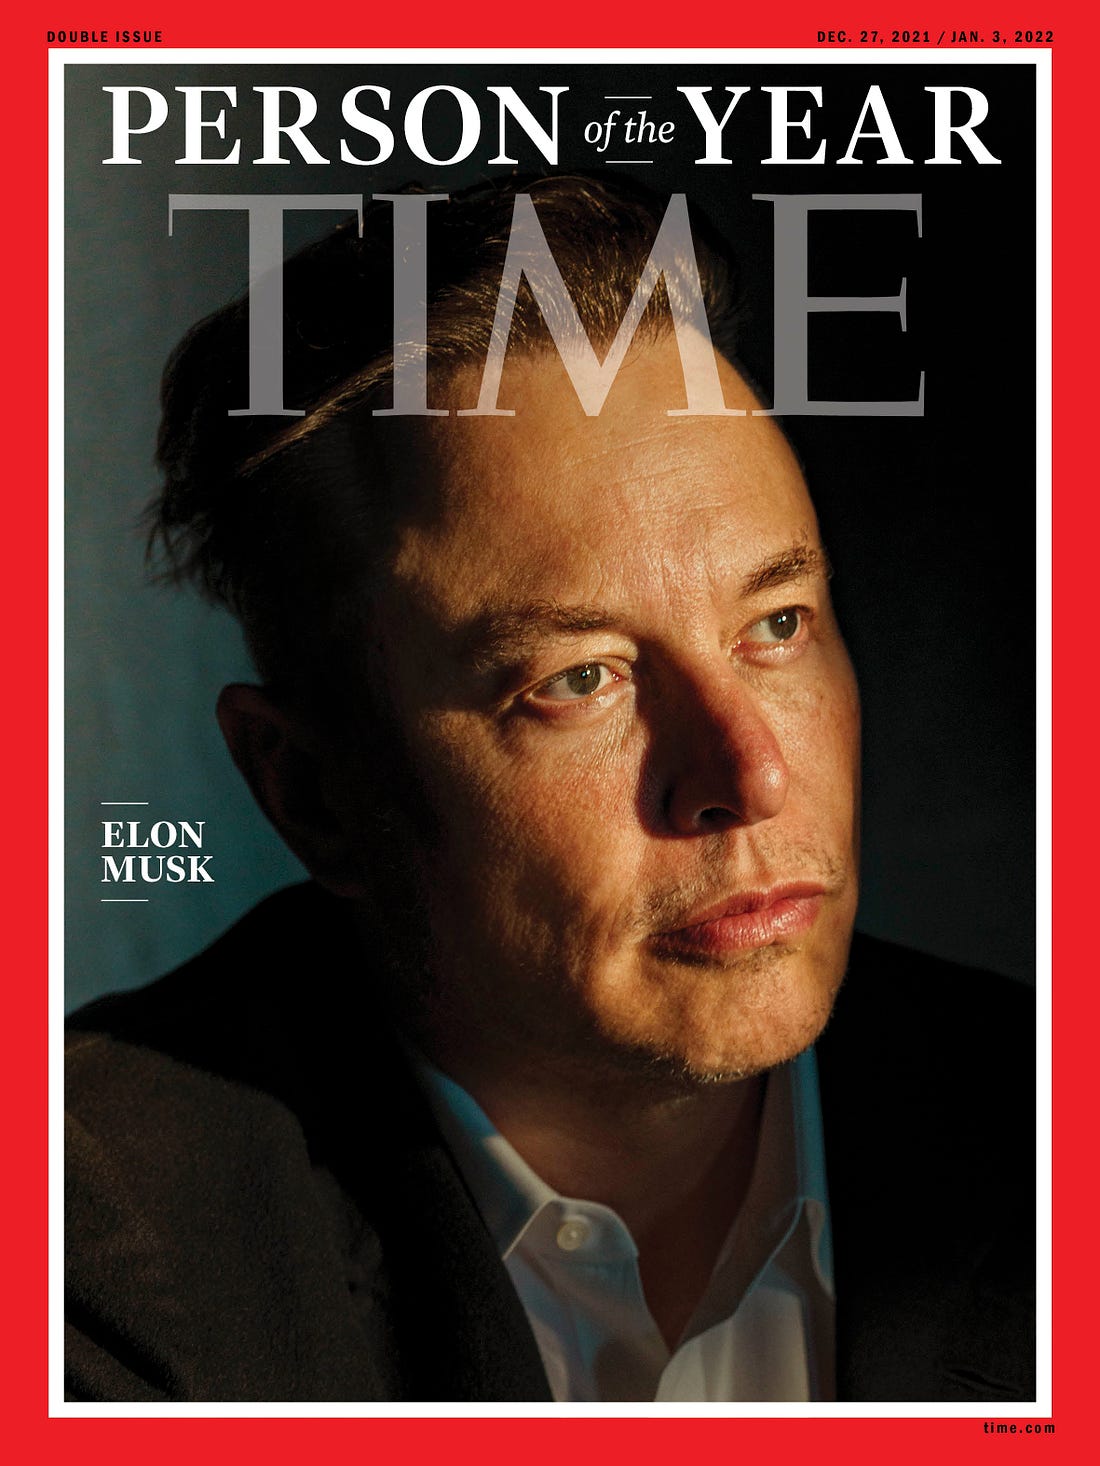 TIME on Twitter: &quot;Elon Musk (@elonmusk) is TIME&#39;s 2021 Person of the Year  #TIMEPOY https://t.co/8Y5BhIldNs https://t.co/B6h6rndjIh&quot; / Twitter